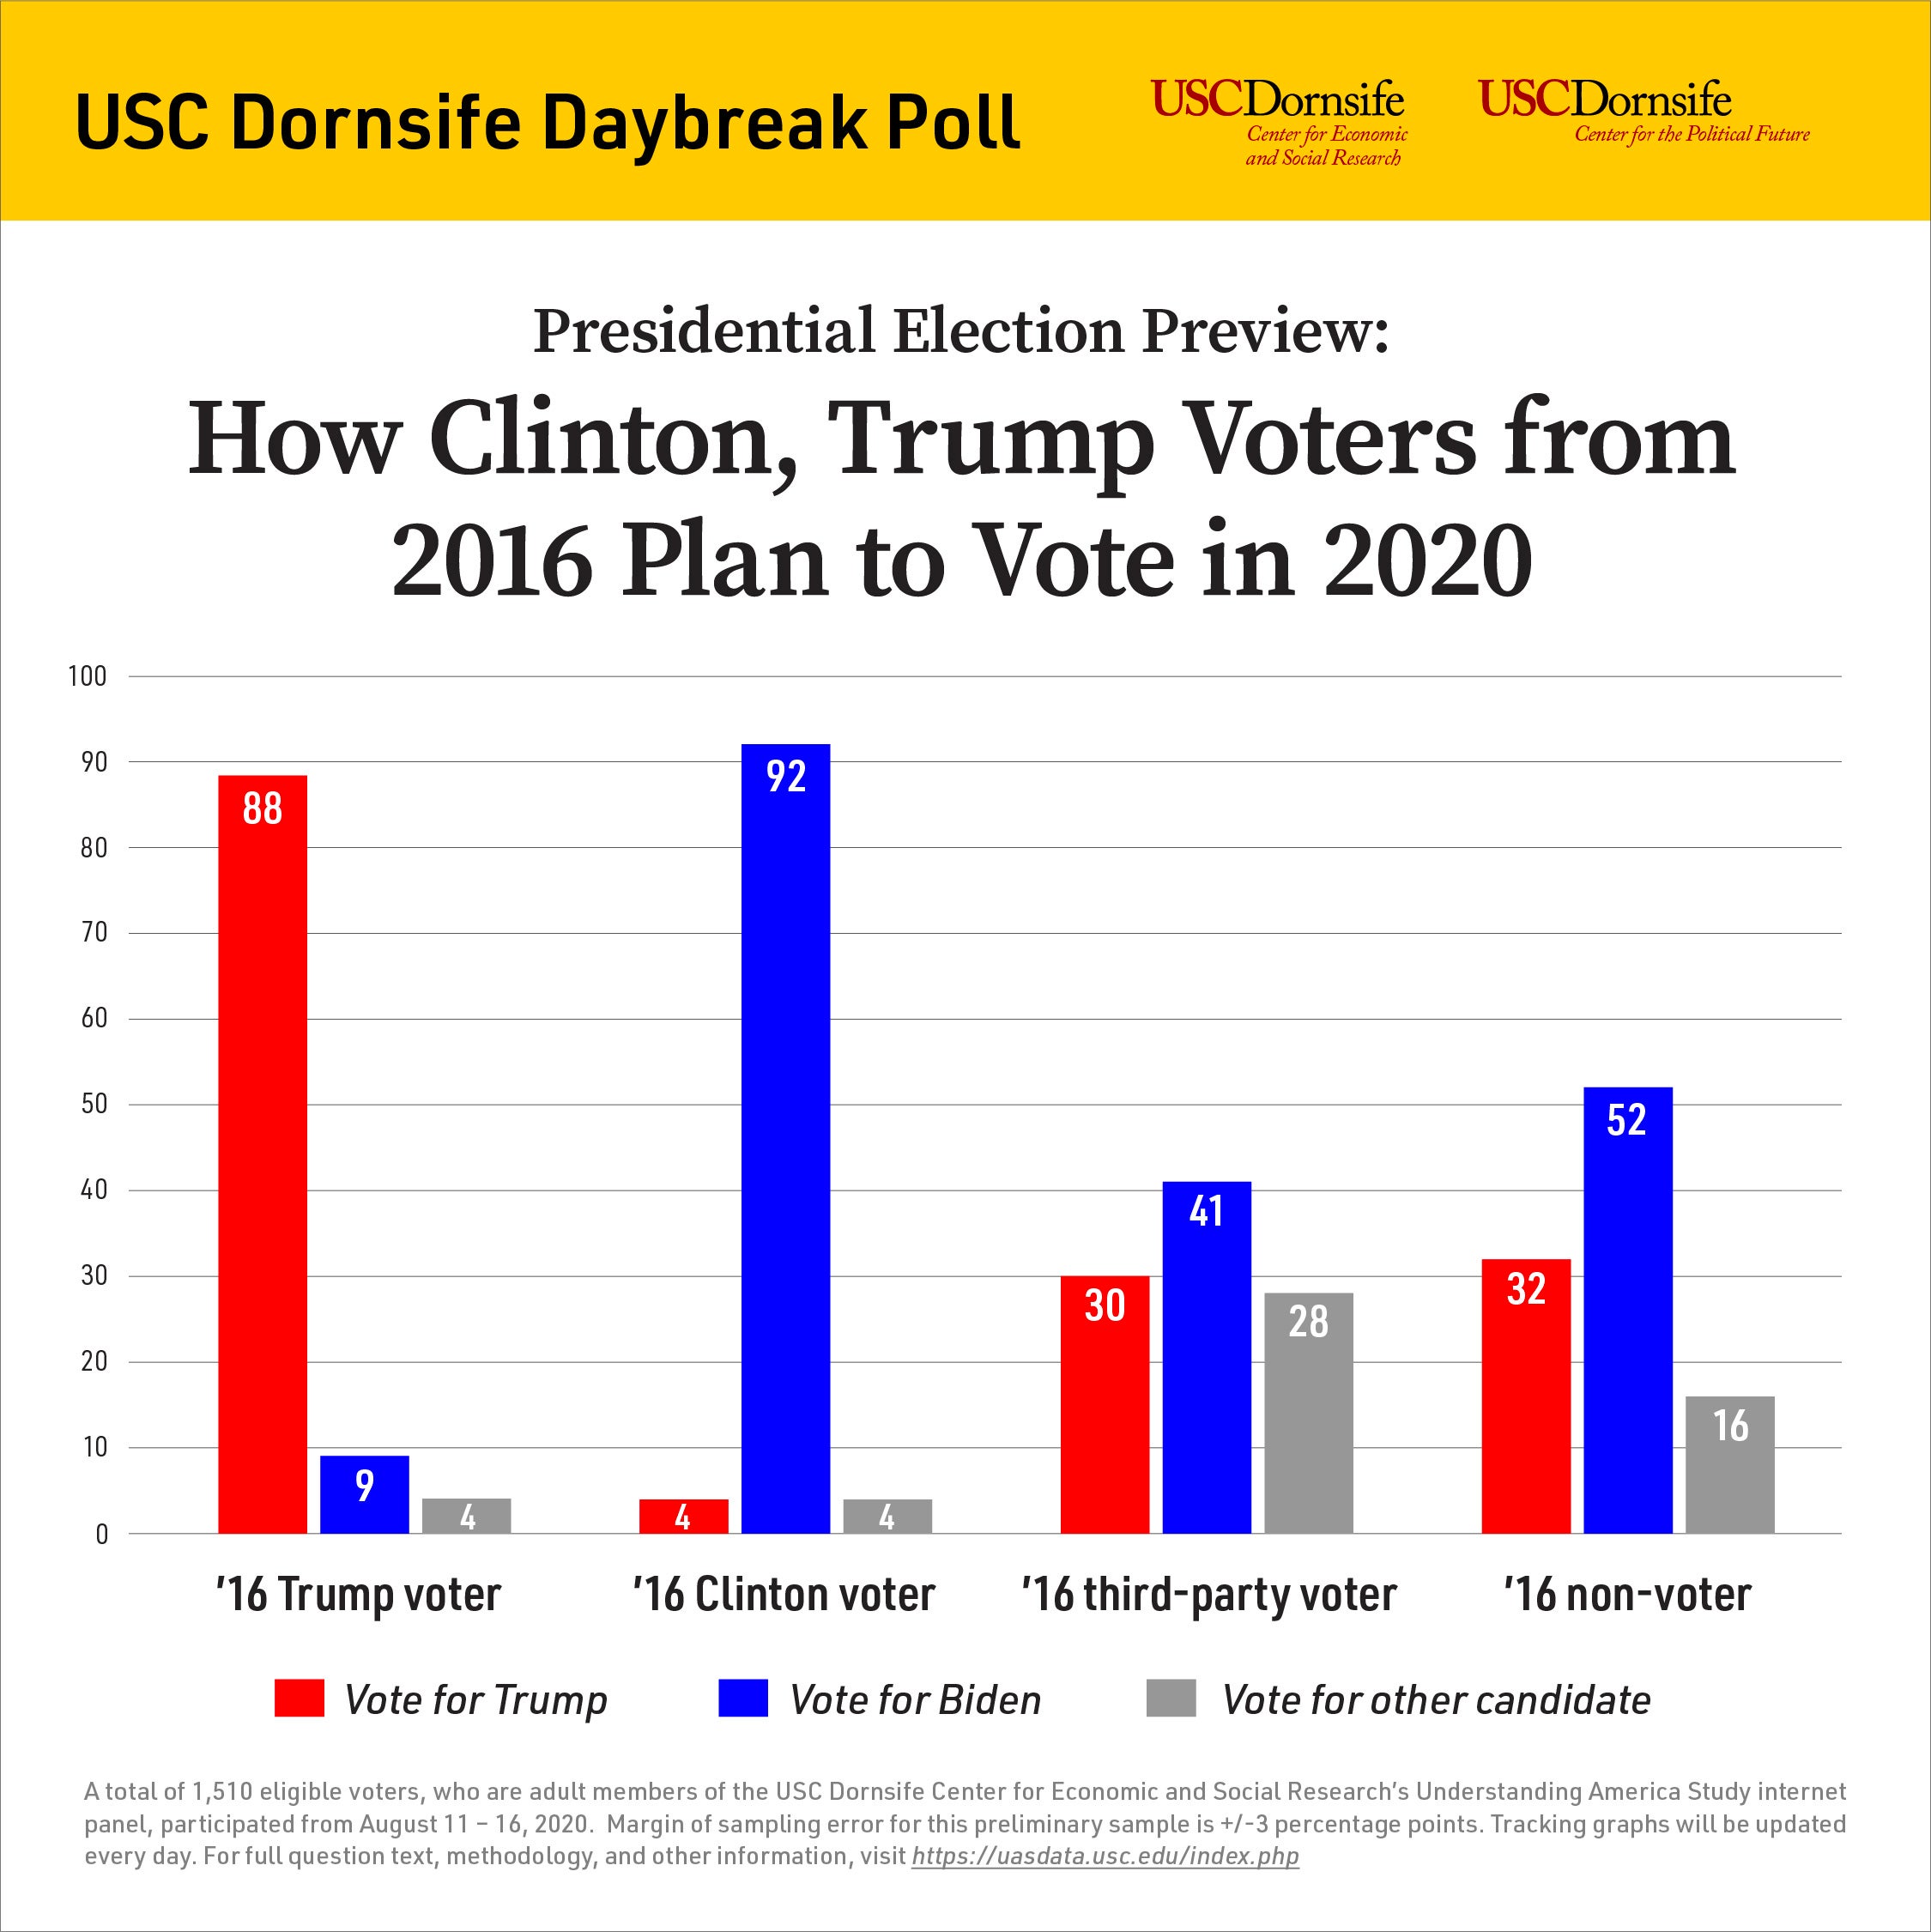 Bar graph compares how those who voted for Donald Trump, Hillary Clinton, a third-party candidate or no one in 2016 will vote in 2020. 